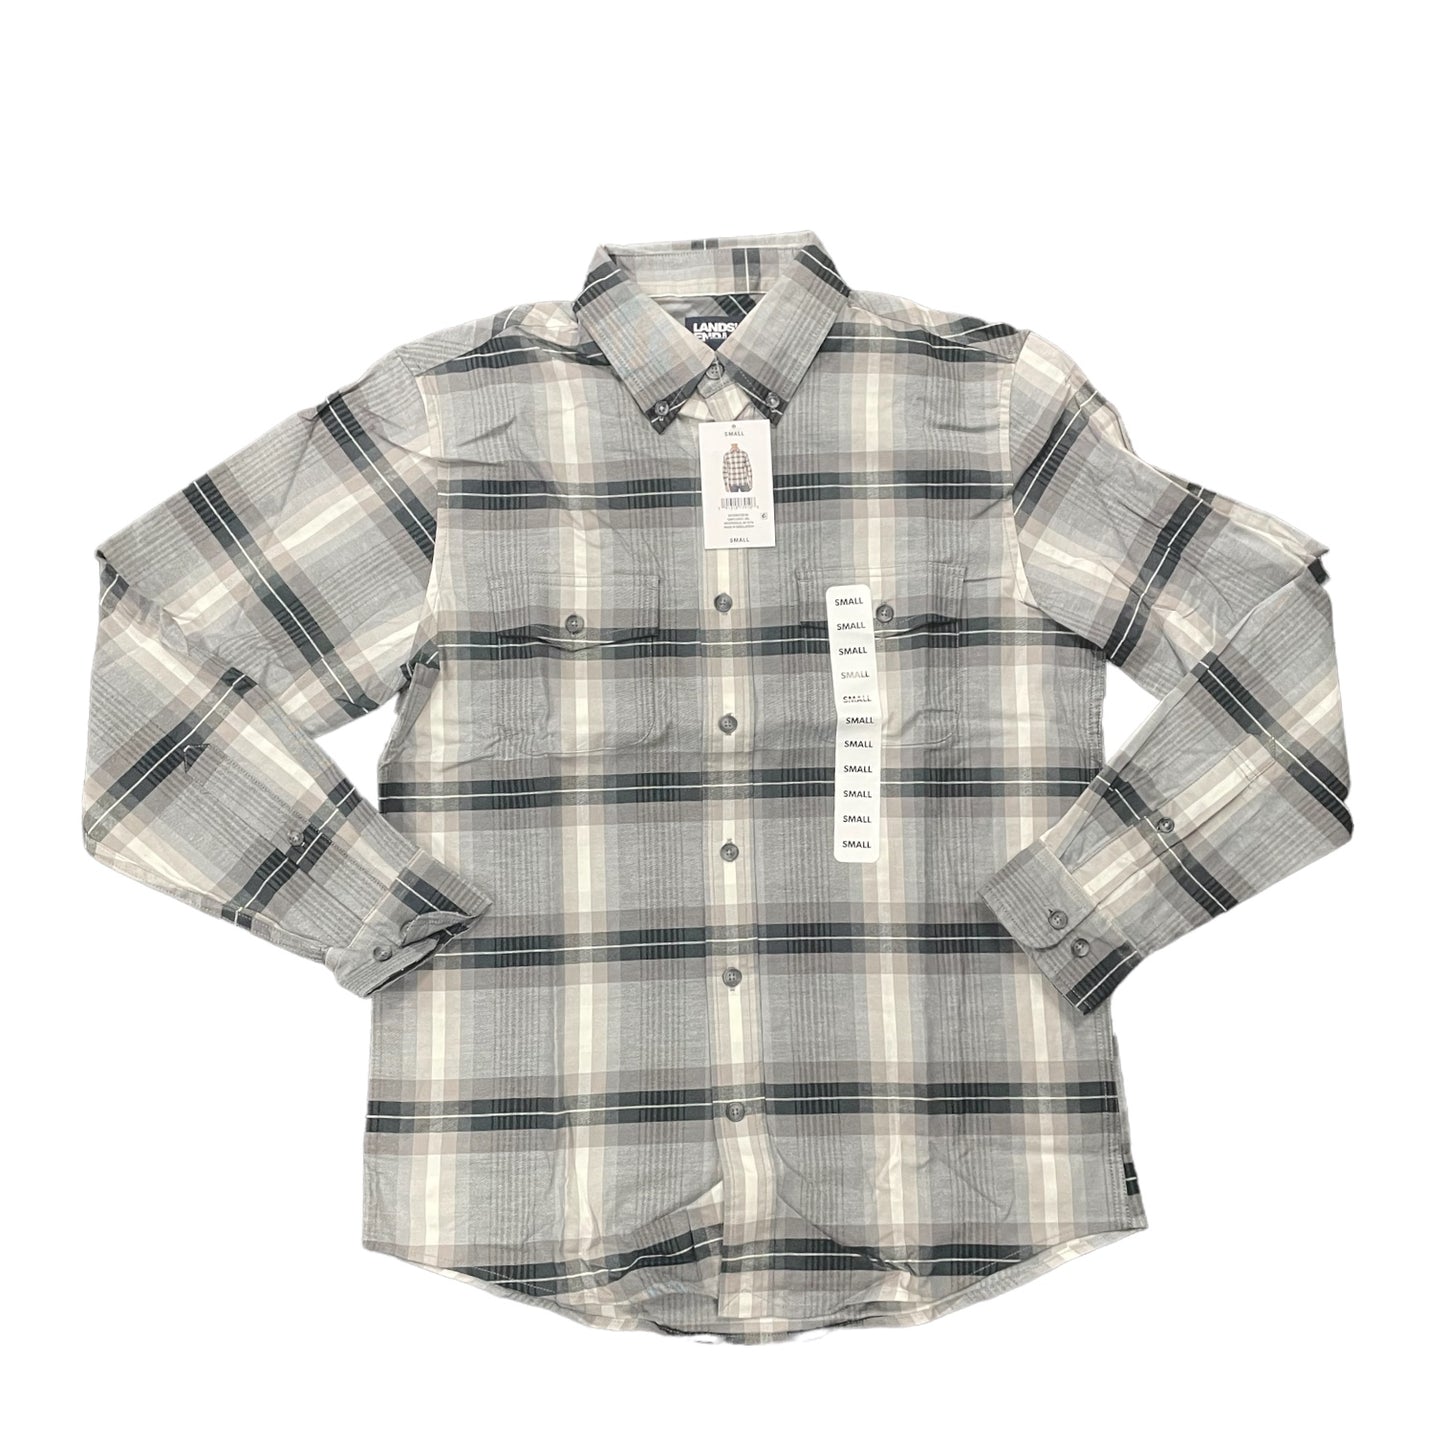 Land's End Men's Traditional Fit Comfort First Long Sleeve Button Down Shirt